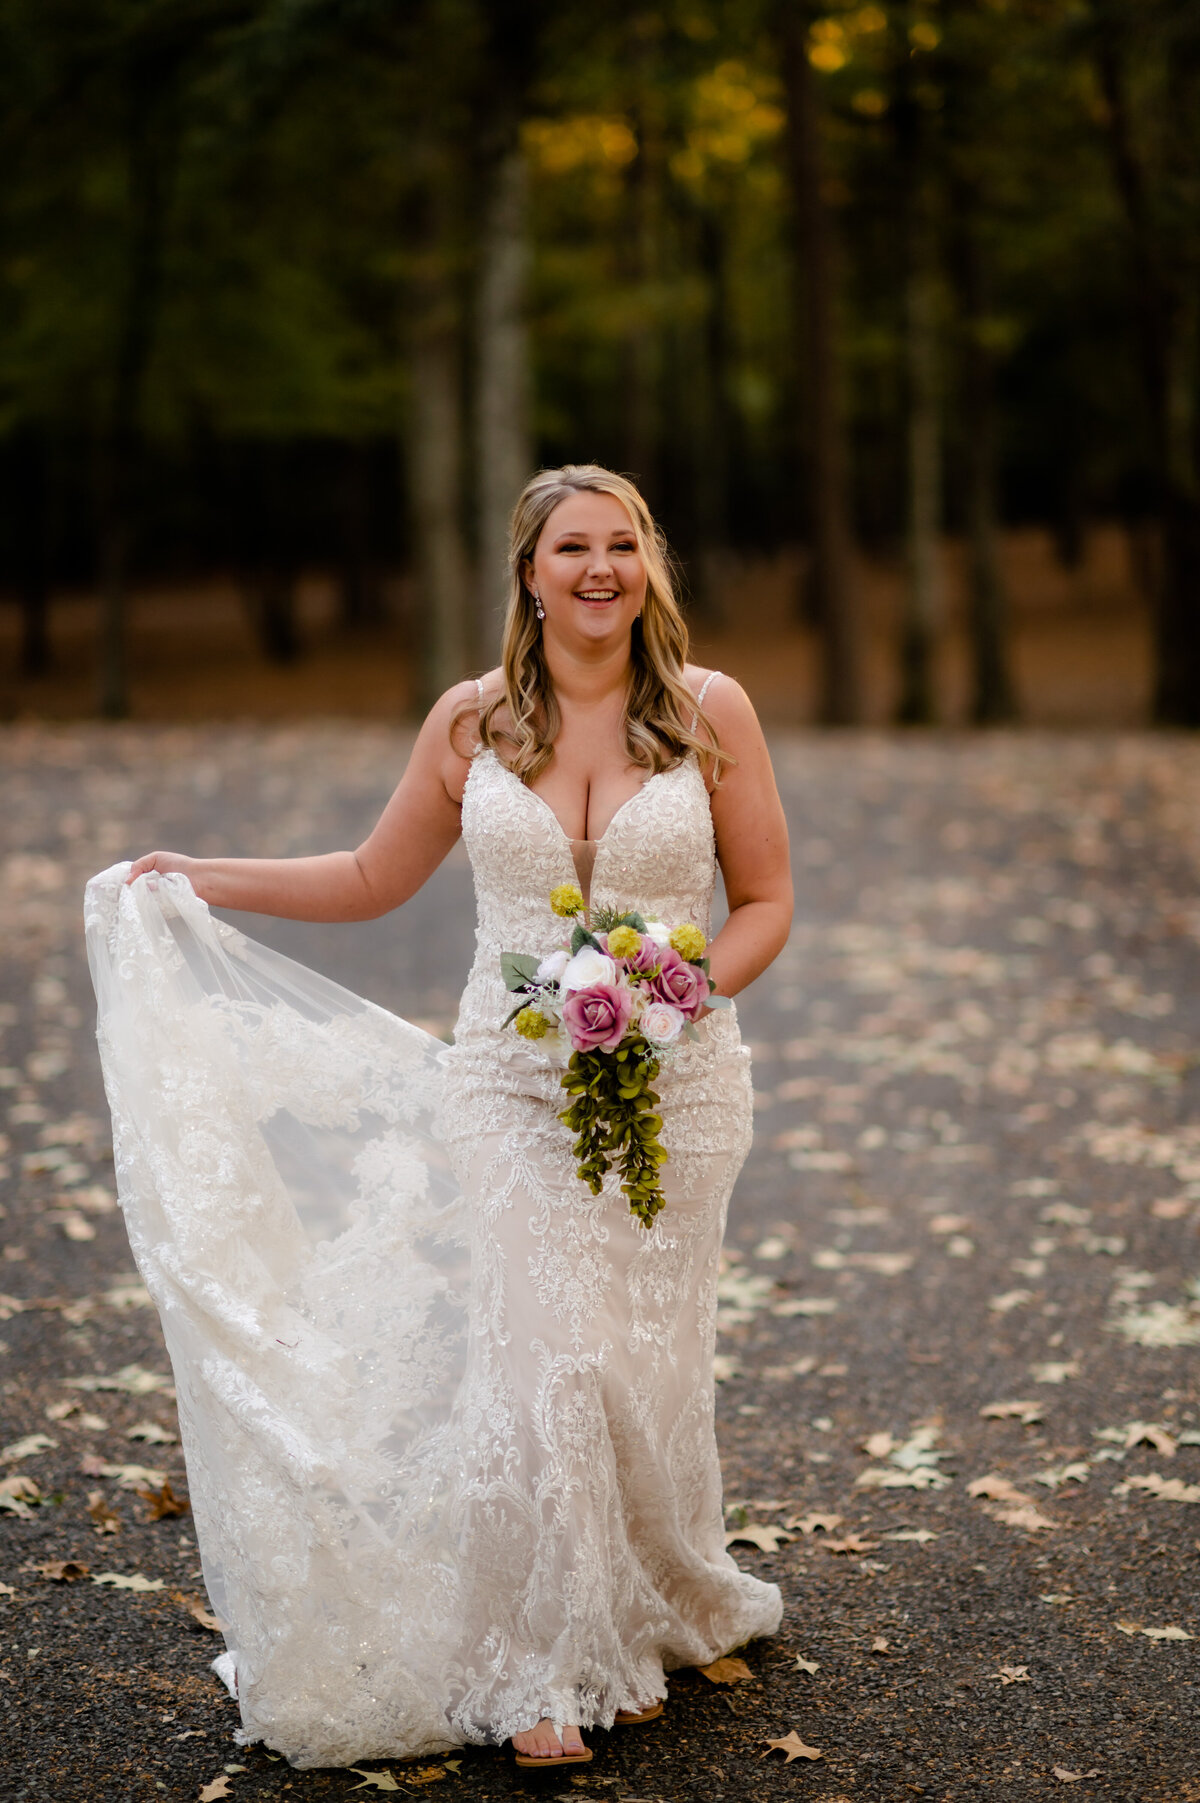 bride dancing in her wedding dress with fallen leaves surrounding her as she smiles